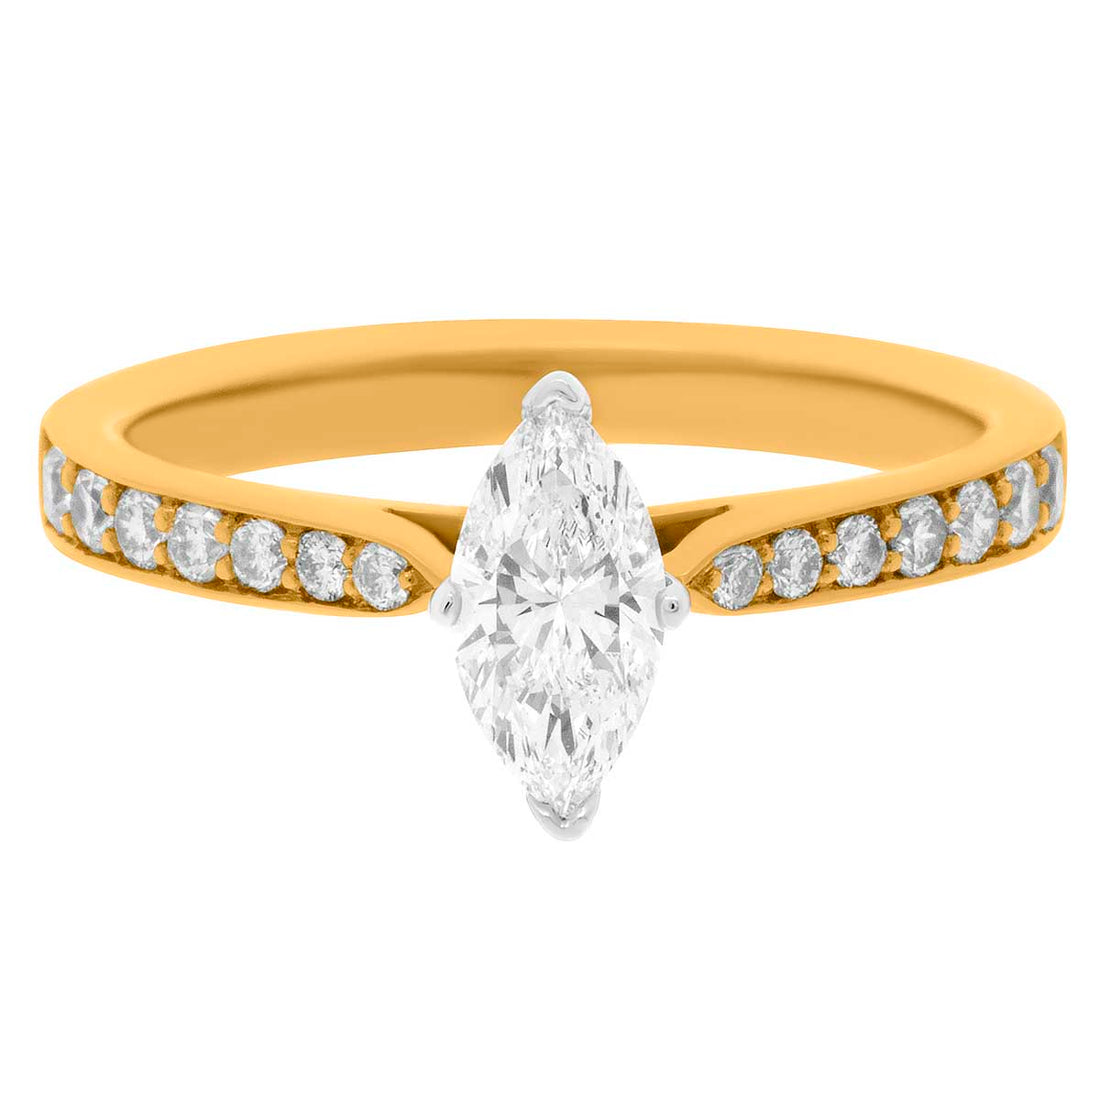 Marquise Engagement Ring made from 18 karat yellow gold